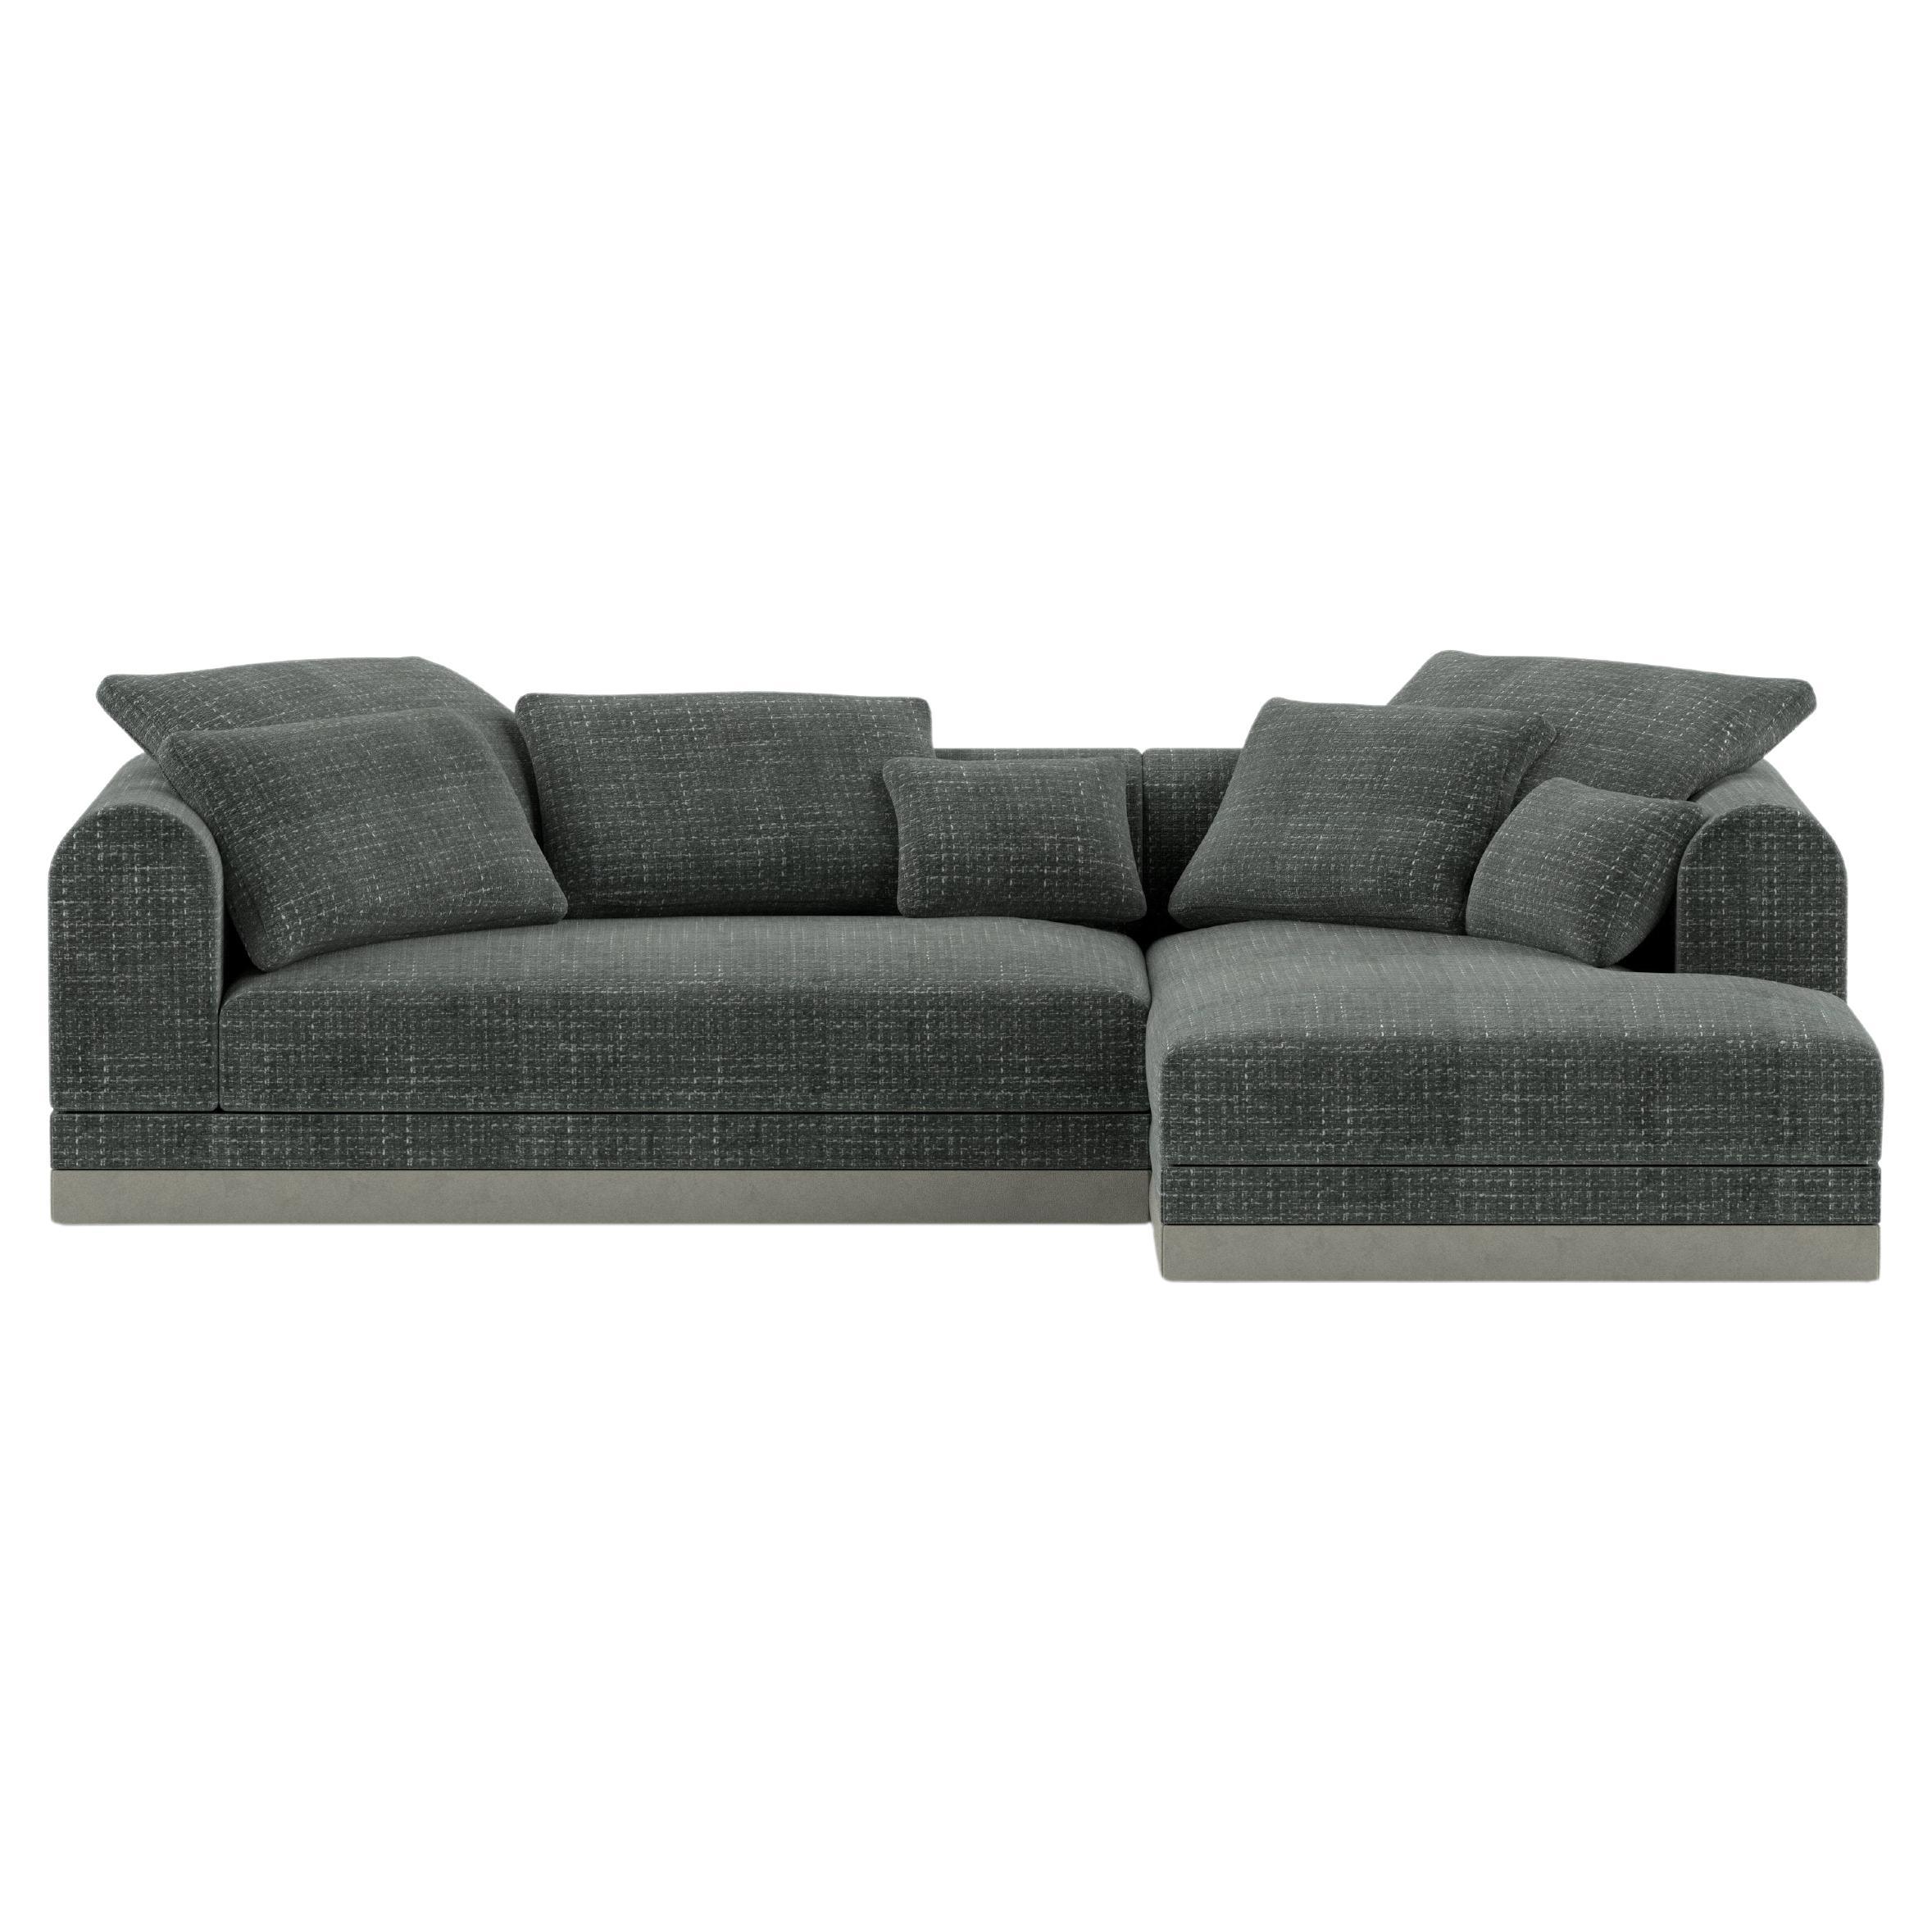 'Aqueduct' Contemporary Sofa by Poiat, Setup 1, Yang 95, Low Plinth For Sale